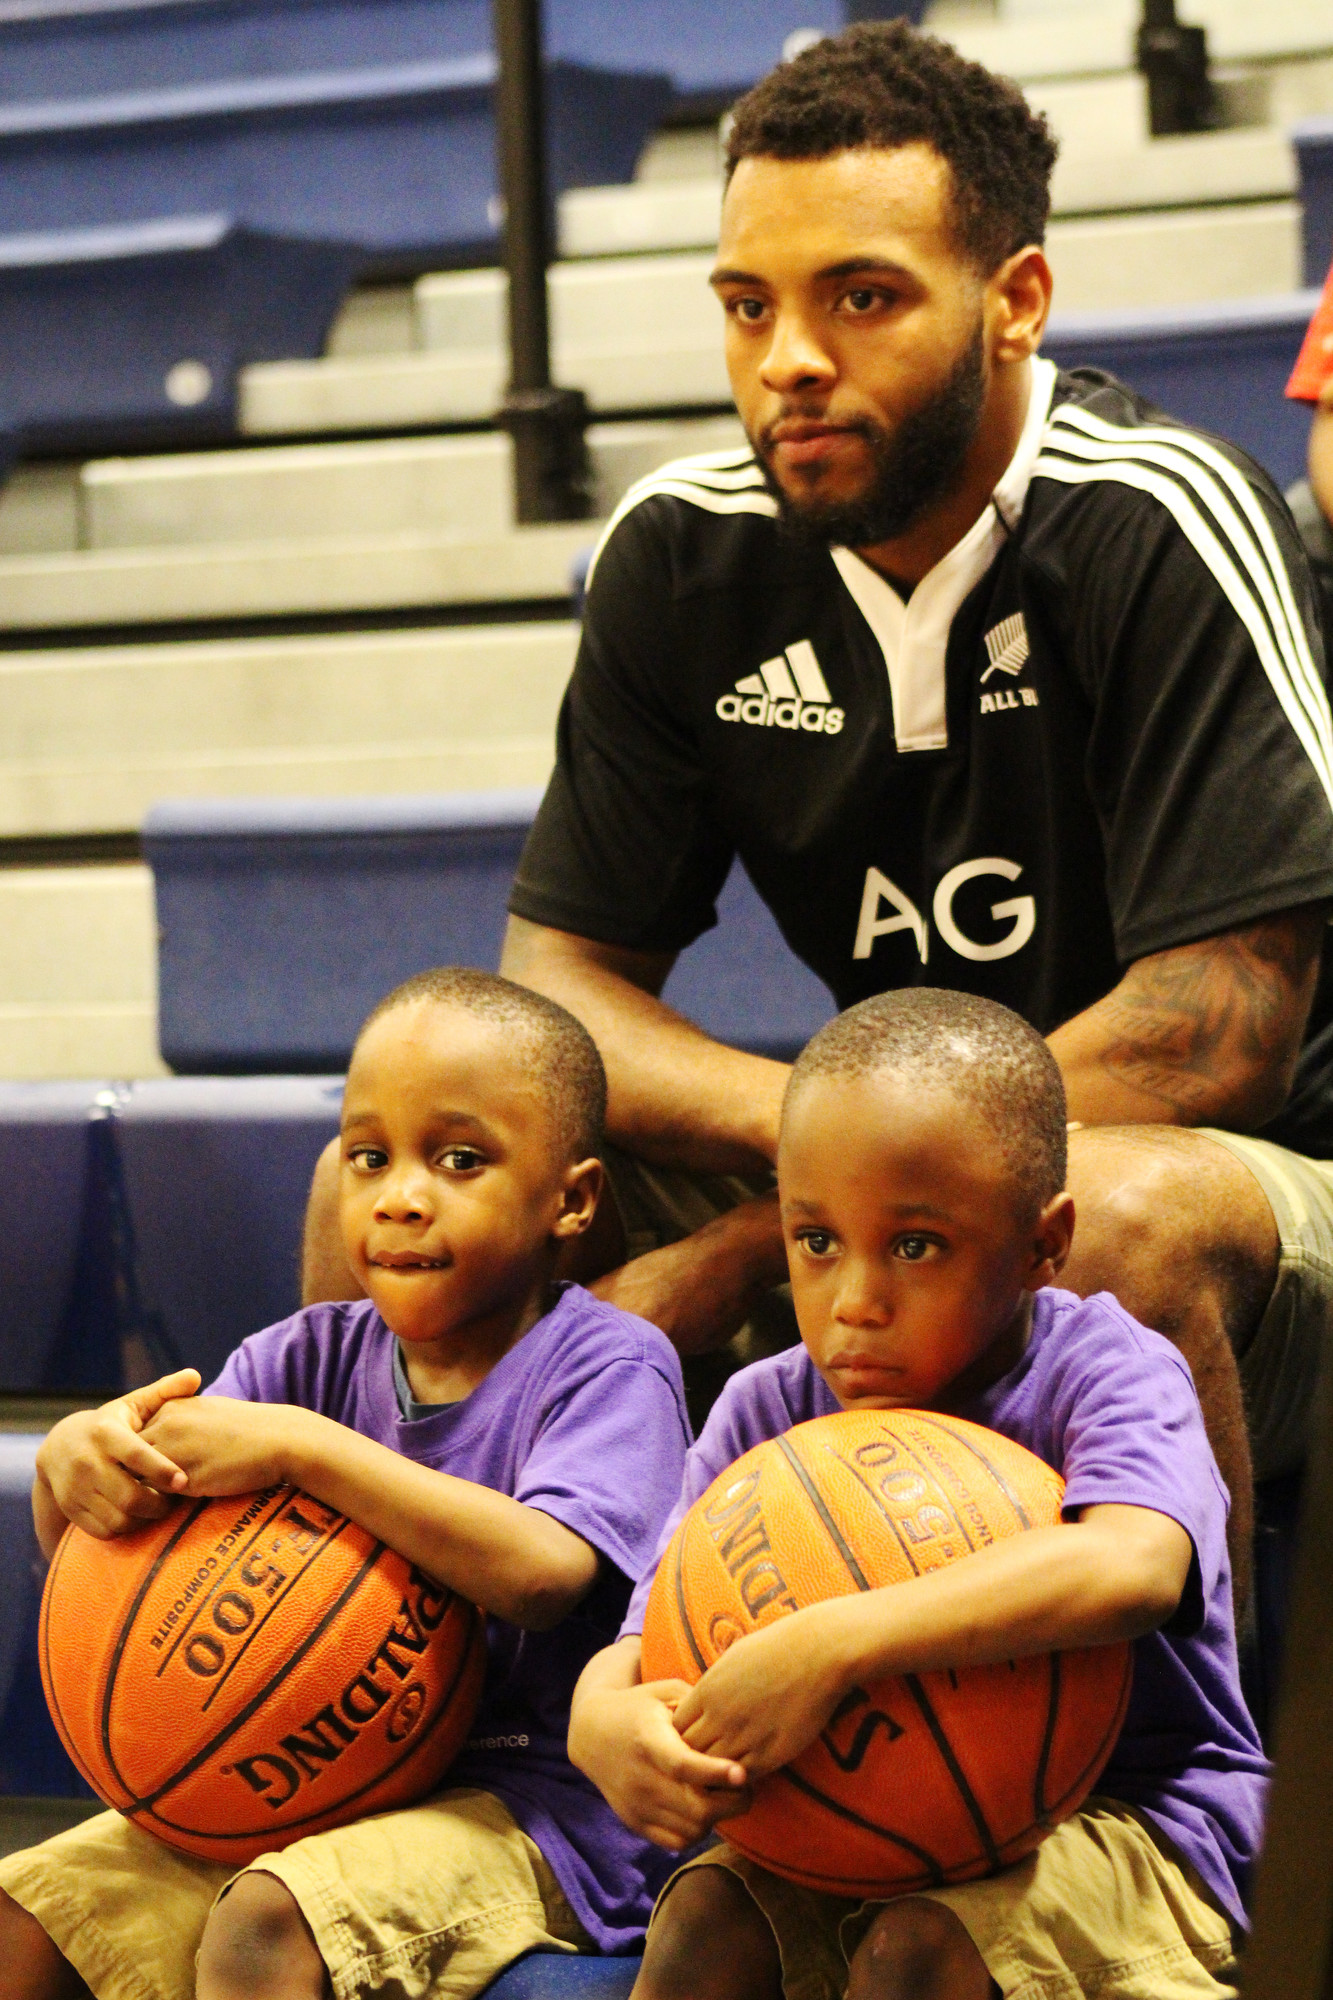 Javon and Javar Bussereth, 5-year-old twins, watched the games with their uncle, Andy Sejourne.